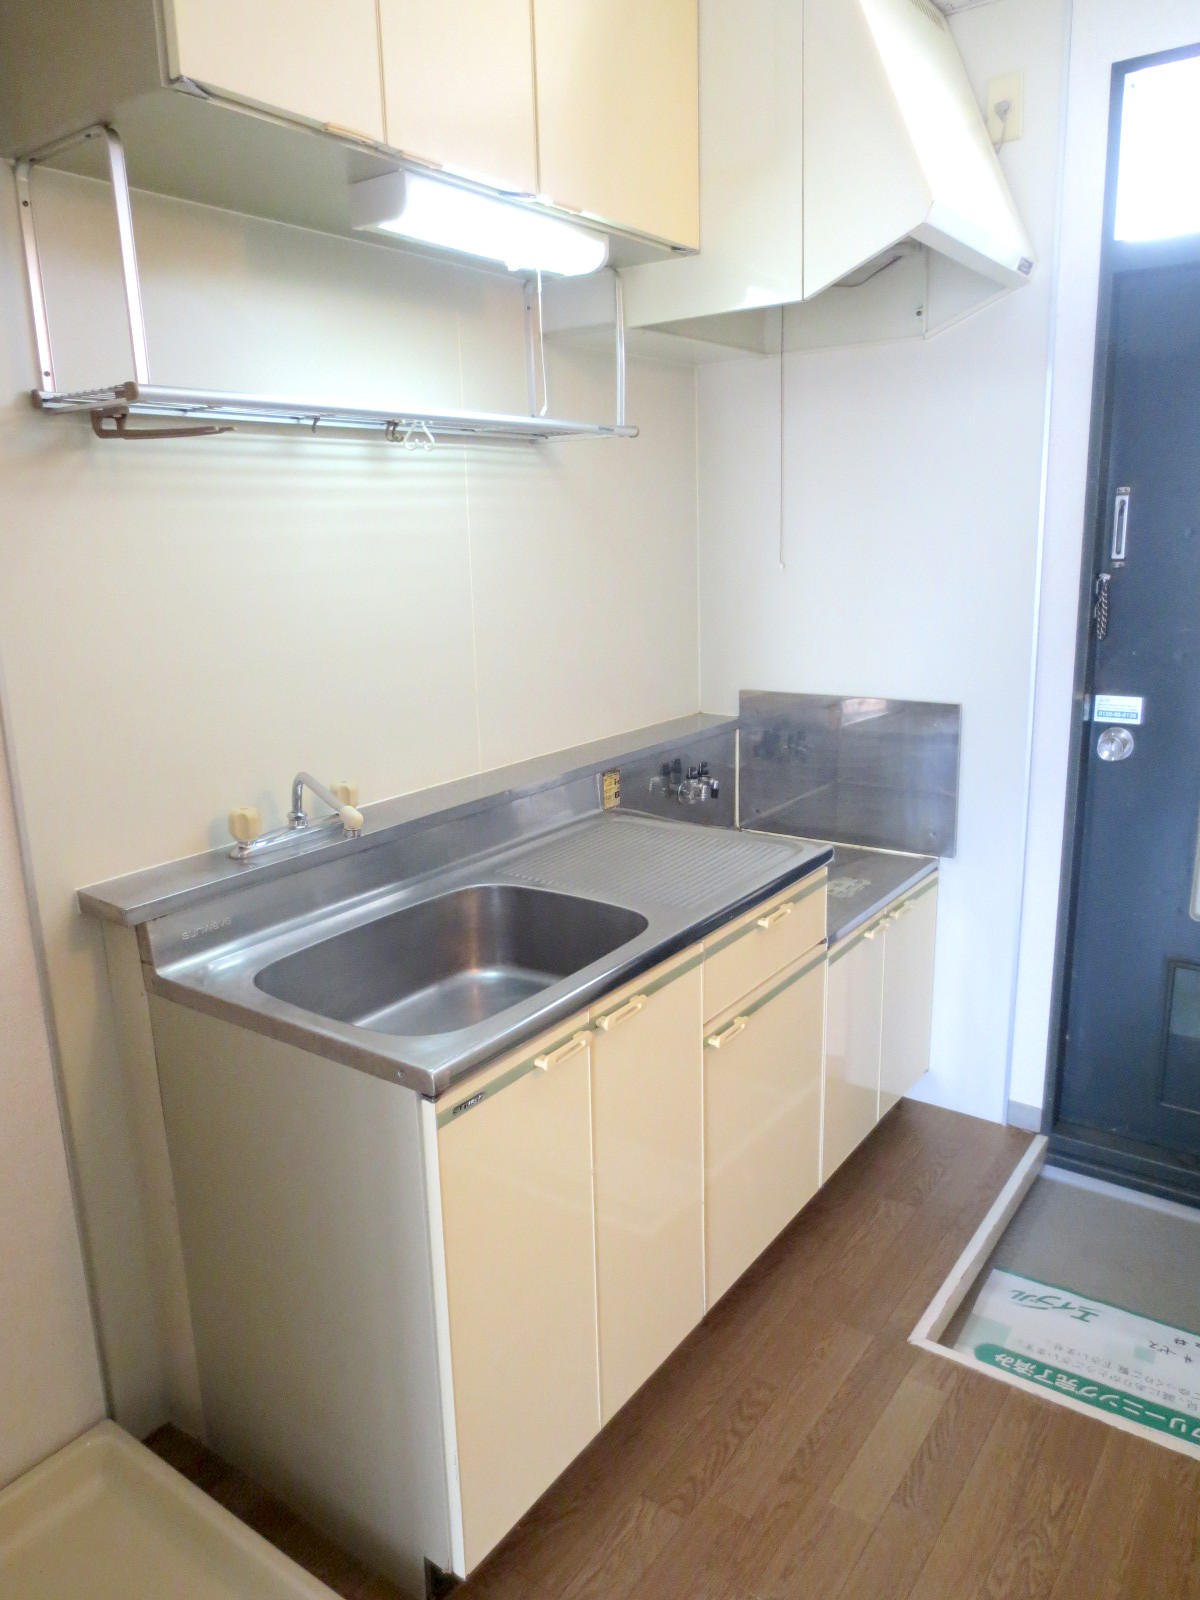 Kitchen. It means two-burner gas stove installed Allowed kitchen to self-catering school ☆ 